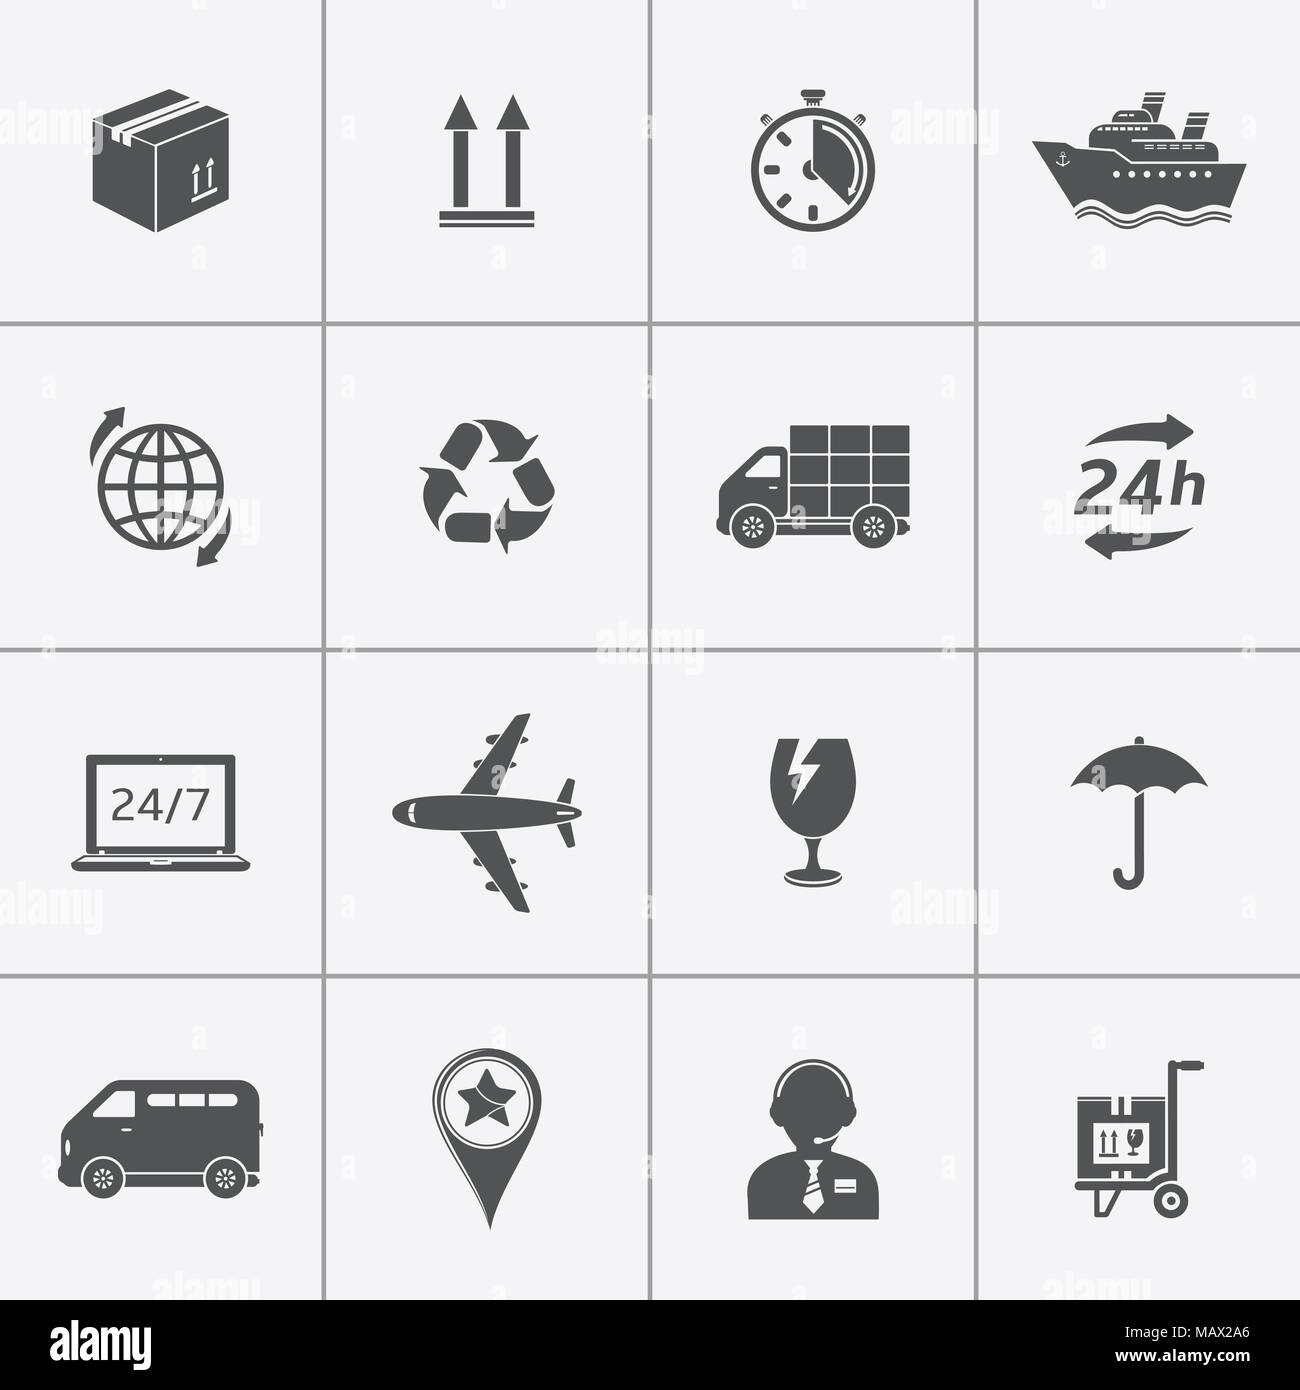 Delivery, shipping and transportation icons in grey color. Vector illustration Stock Vector